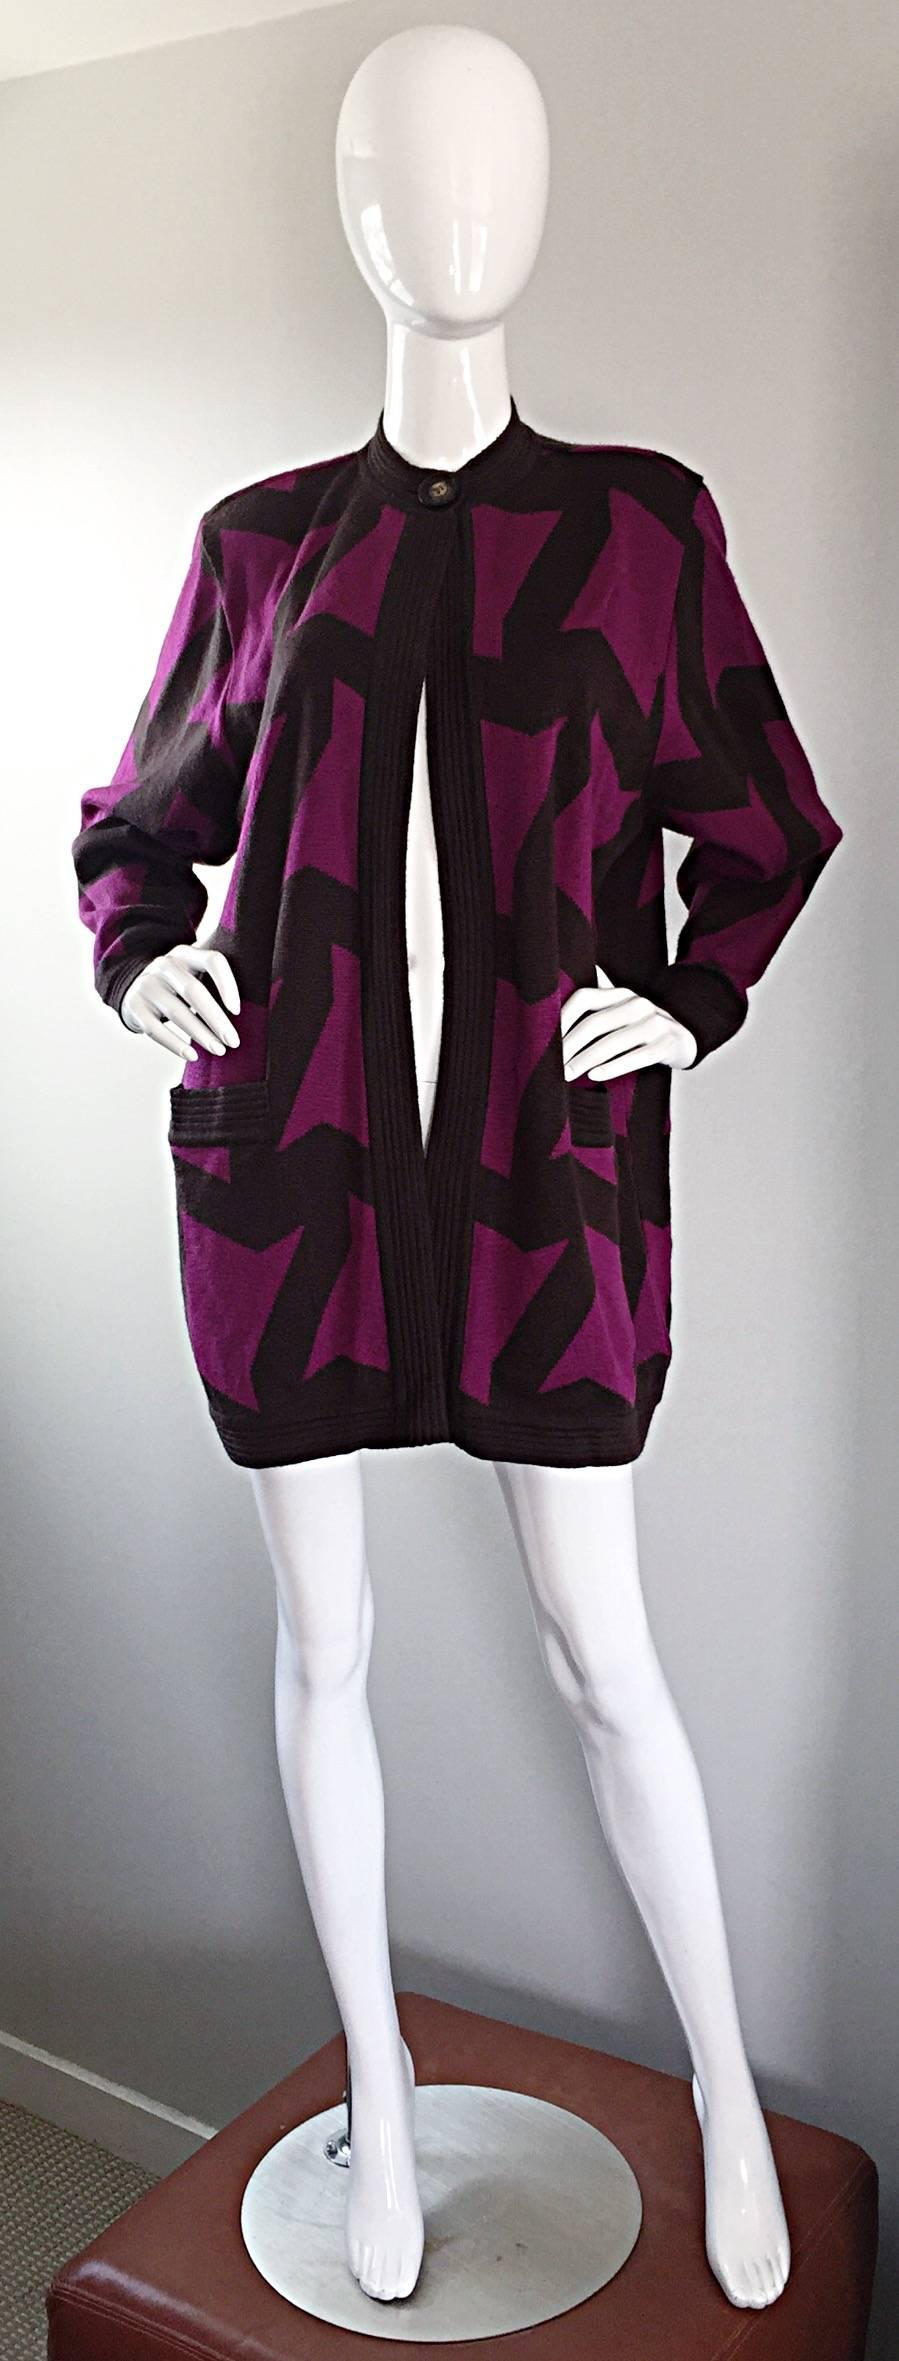 Awesome vintage 1980s / 80s BENARD HOLTZMAH, for HARVE BENARD fuchsia pink + brown 'Swiggle' print cardigan jacket sweater! Avant Garde style, with dolman sleeves and button at top collar. Pockets at both sides of the waist. Comfortable, yet super